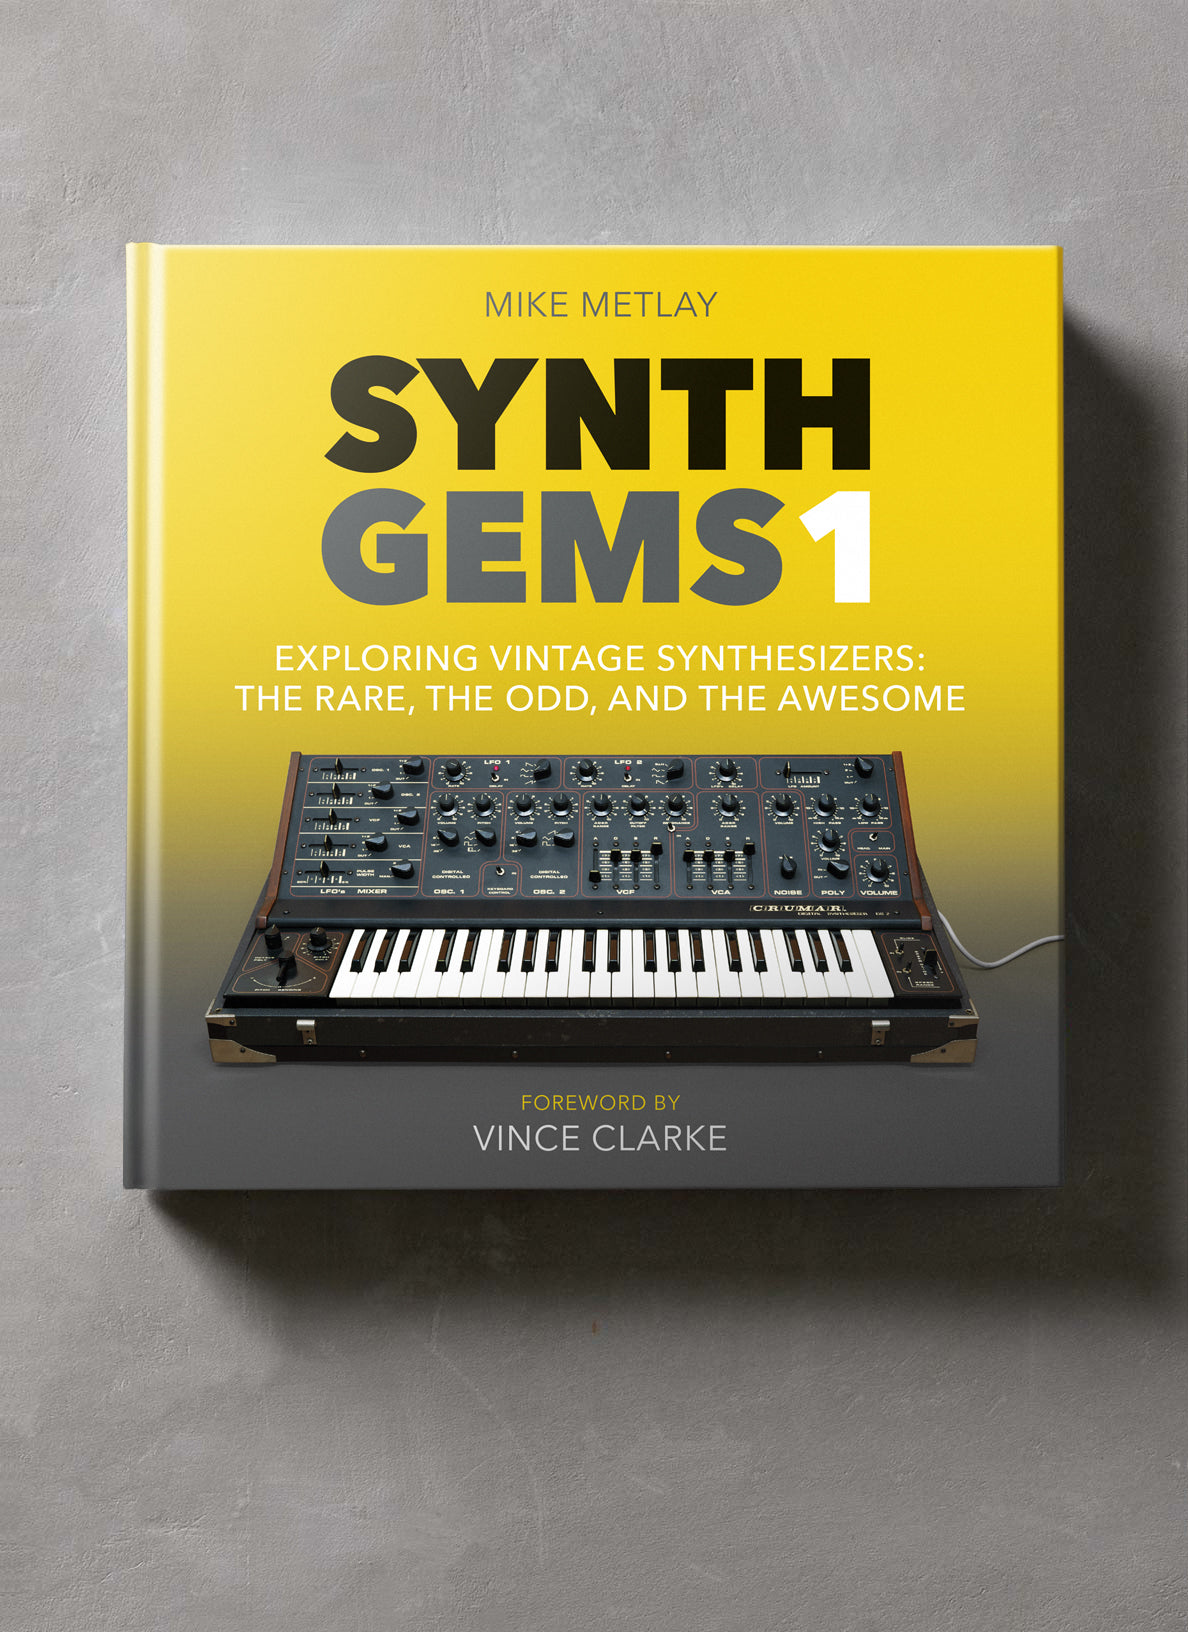 SYNTH GEMS 1 - Exploring Vintage Synthesizers